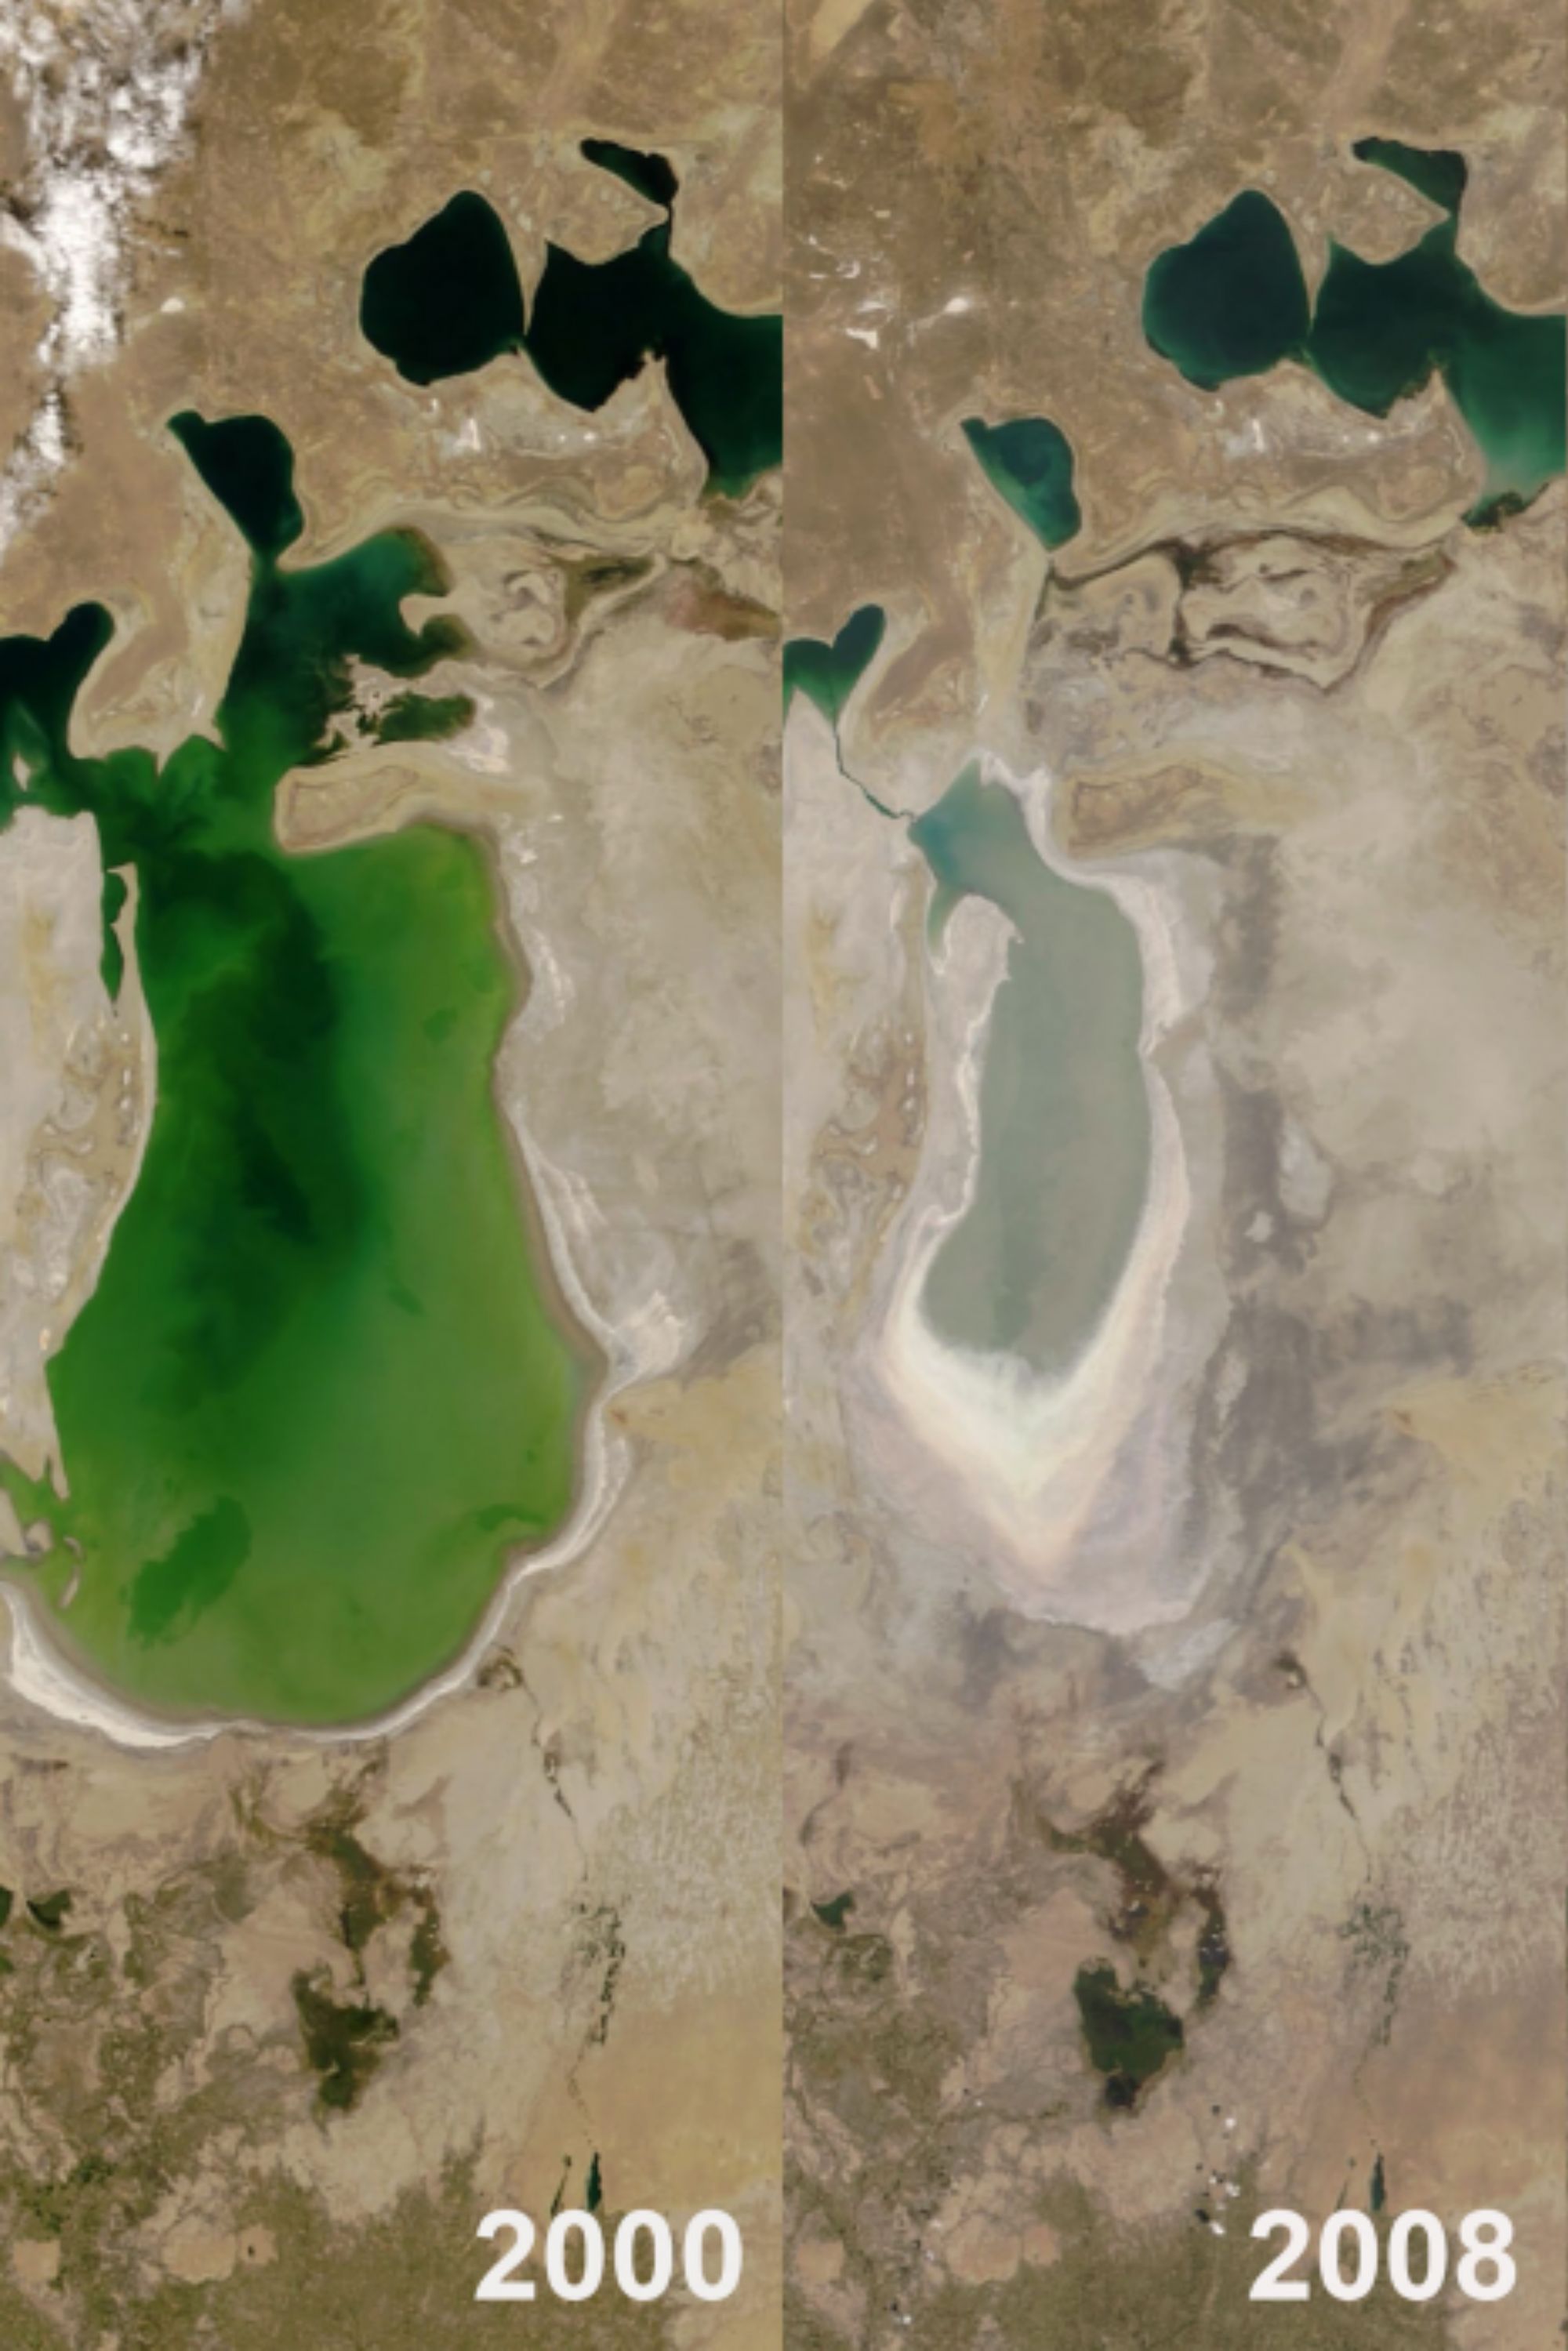 The fourth-largest freshwater lake, The Aral Sea, dried up, but what does this have to do with clothing?